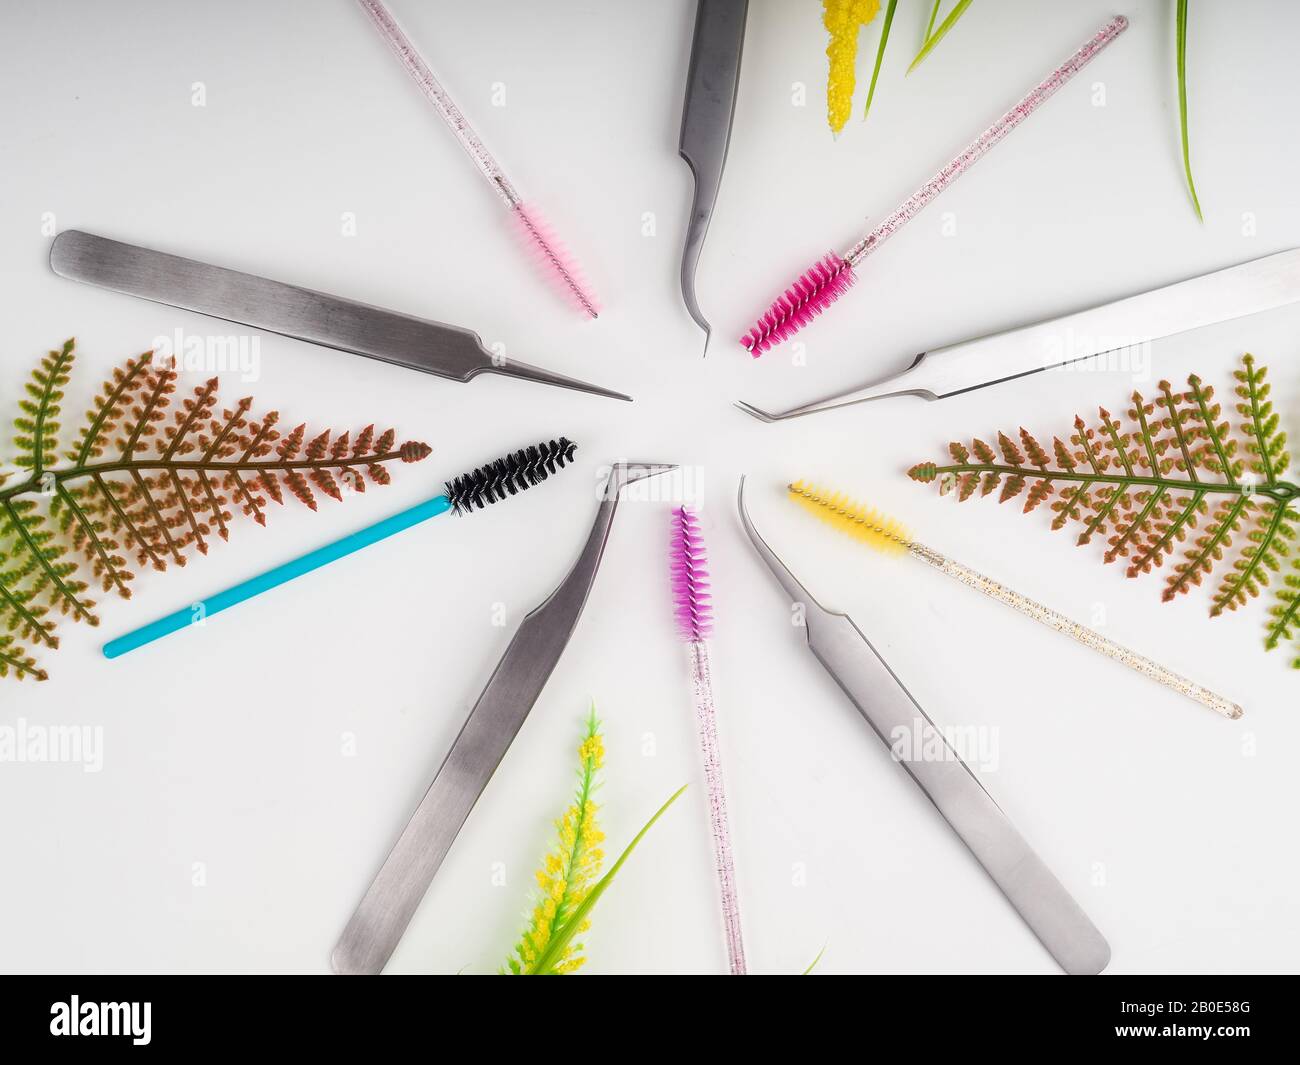 Eyelash Extension tools on white background. Accessories for eyelash extensions. Artificial lashes Stock Photo